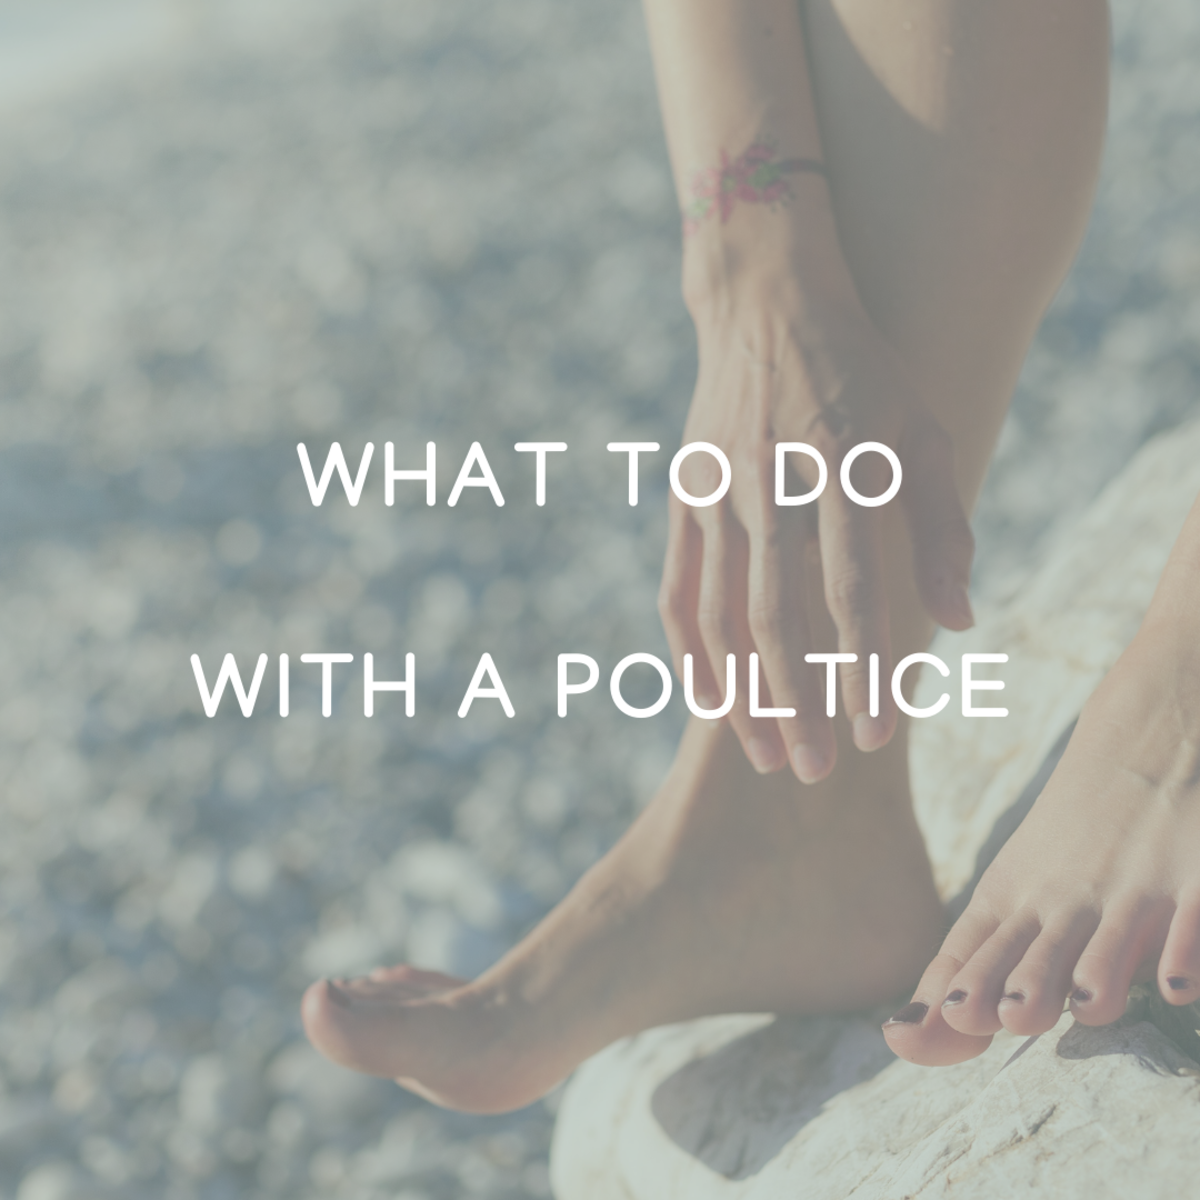 How to Make a Poultice for Removing Splinters, Boils and Abscesses